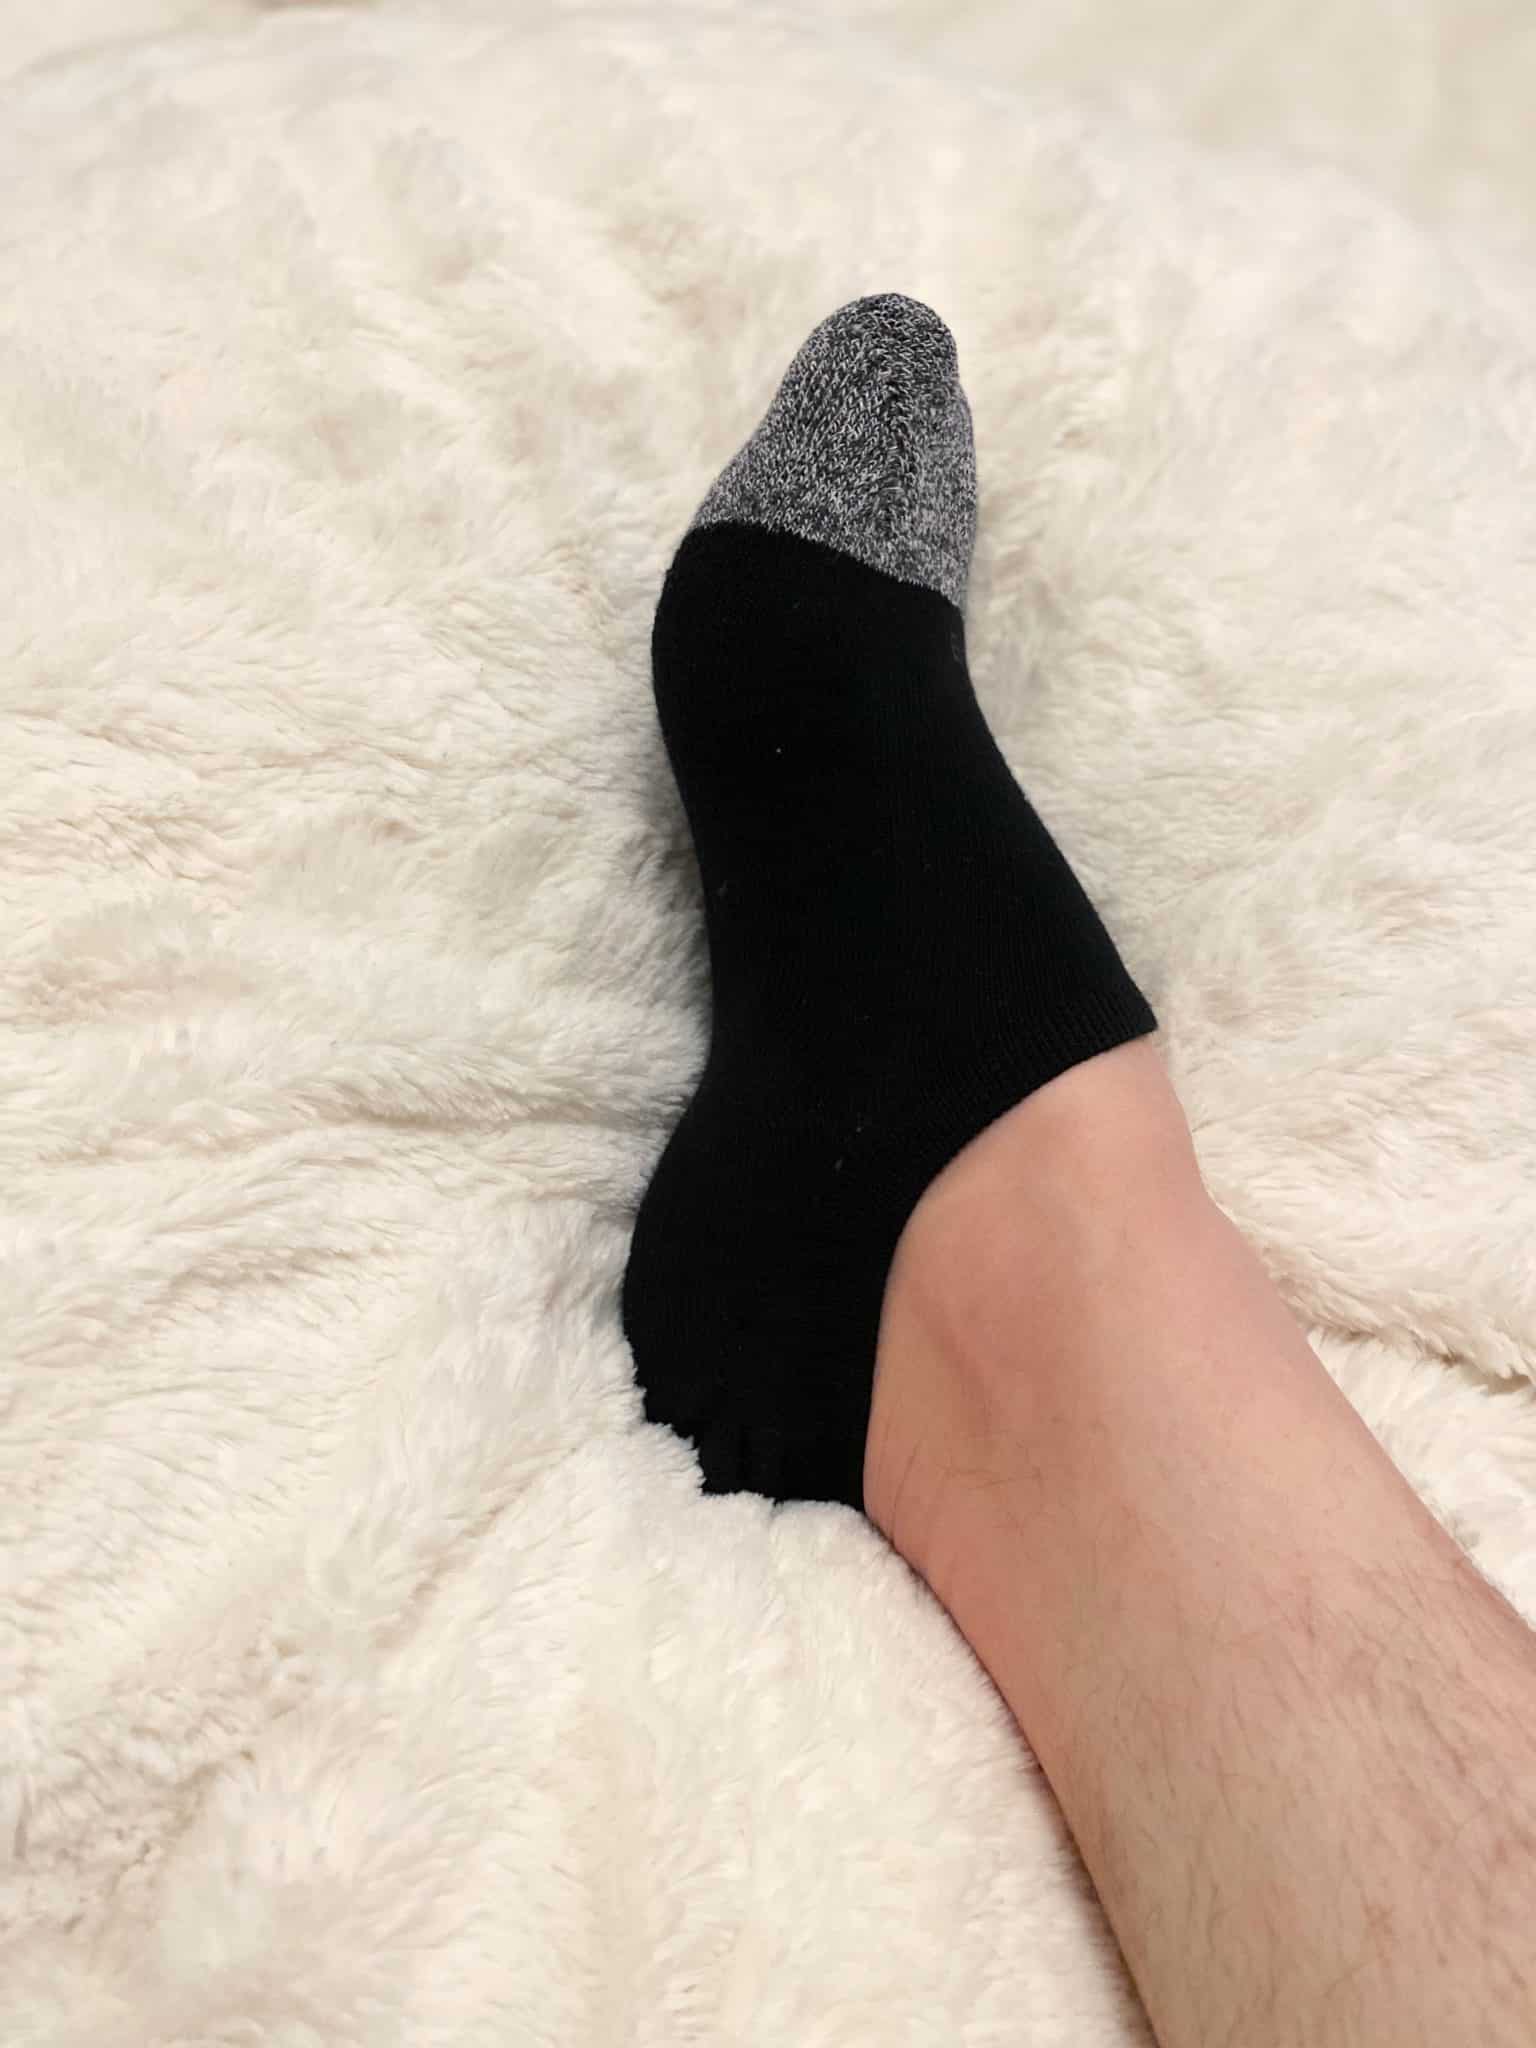 Bombas Sock Review: The Quest For The Perfect Sock Ends?